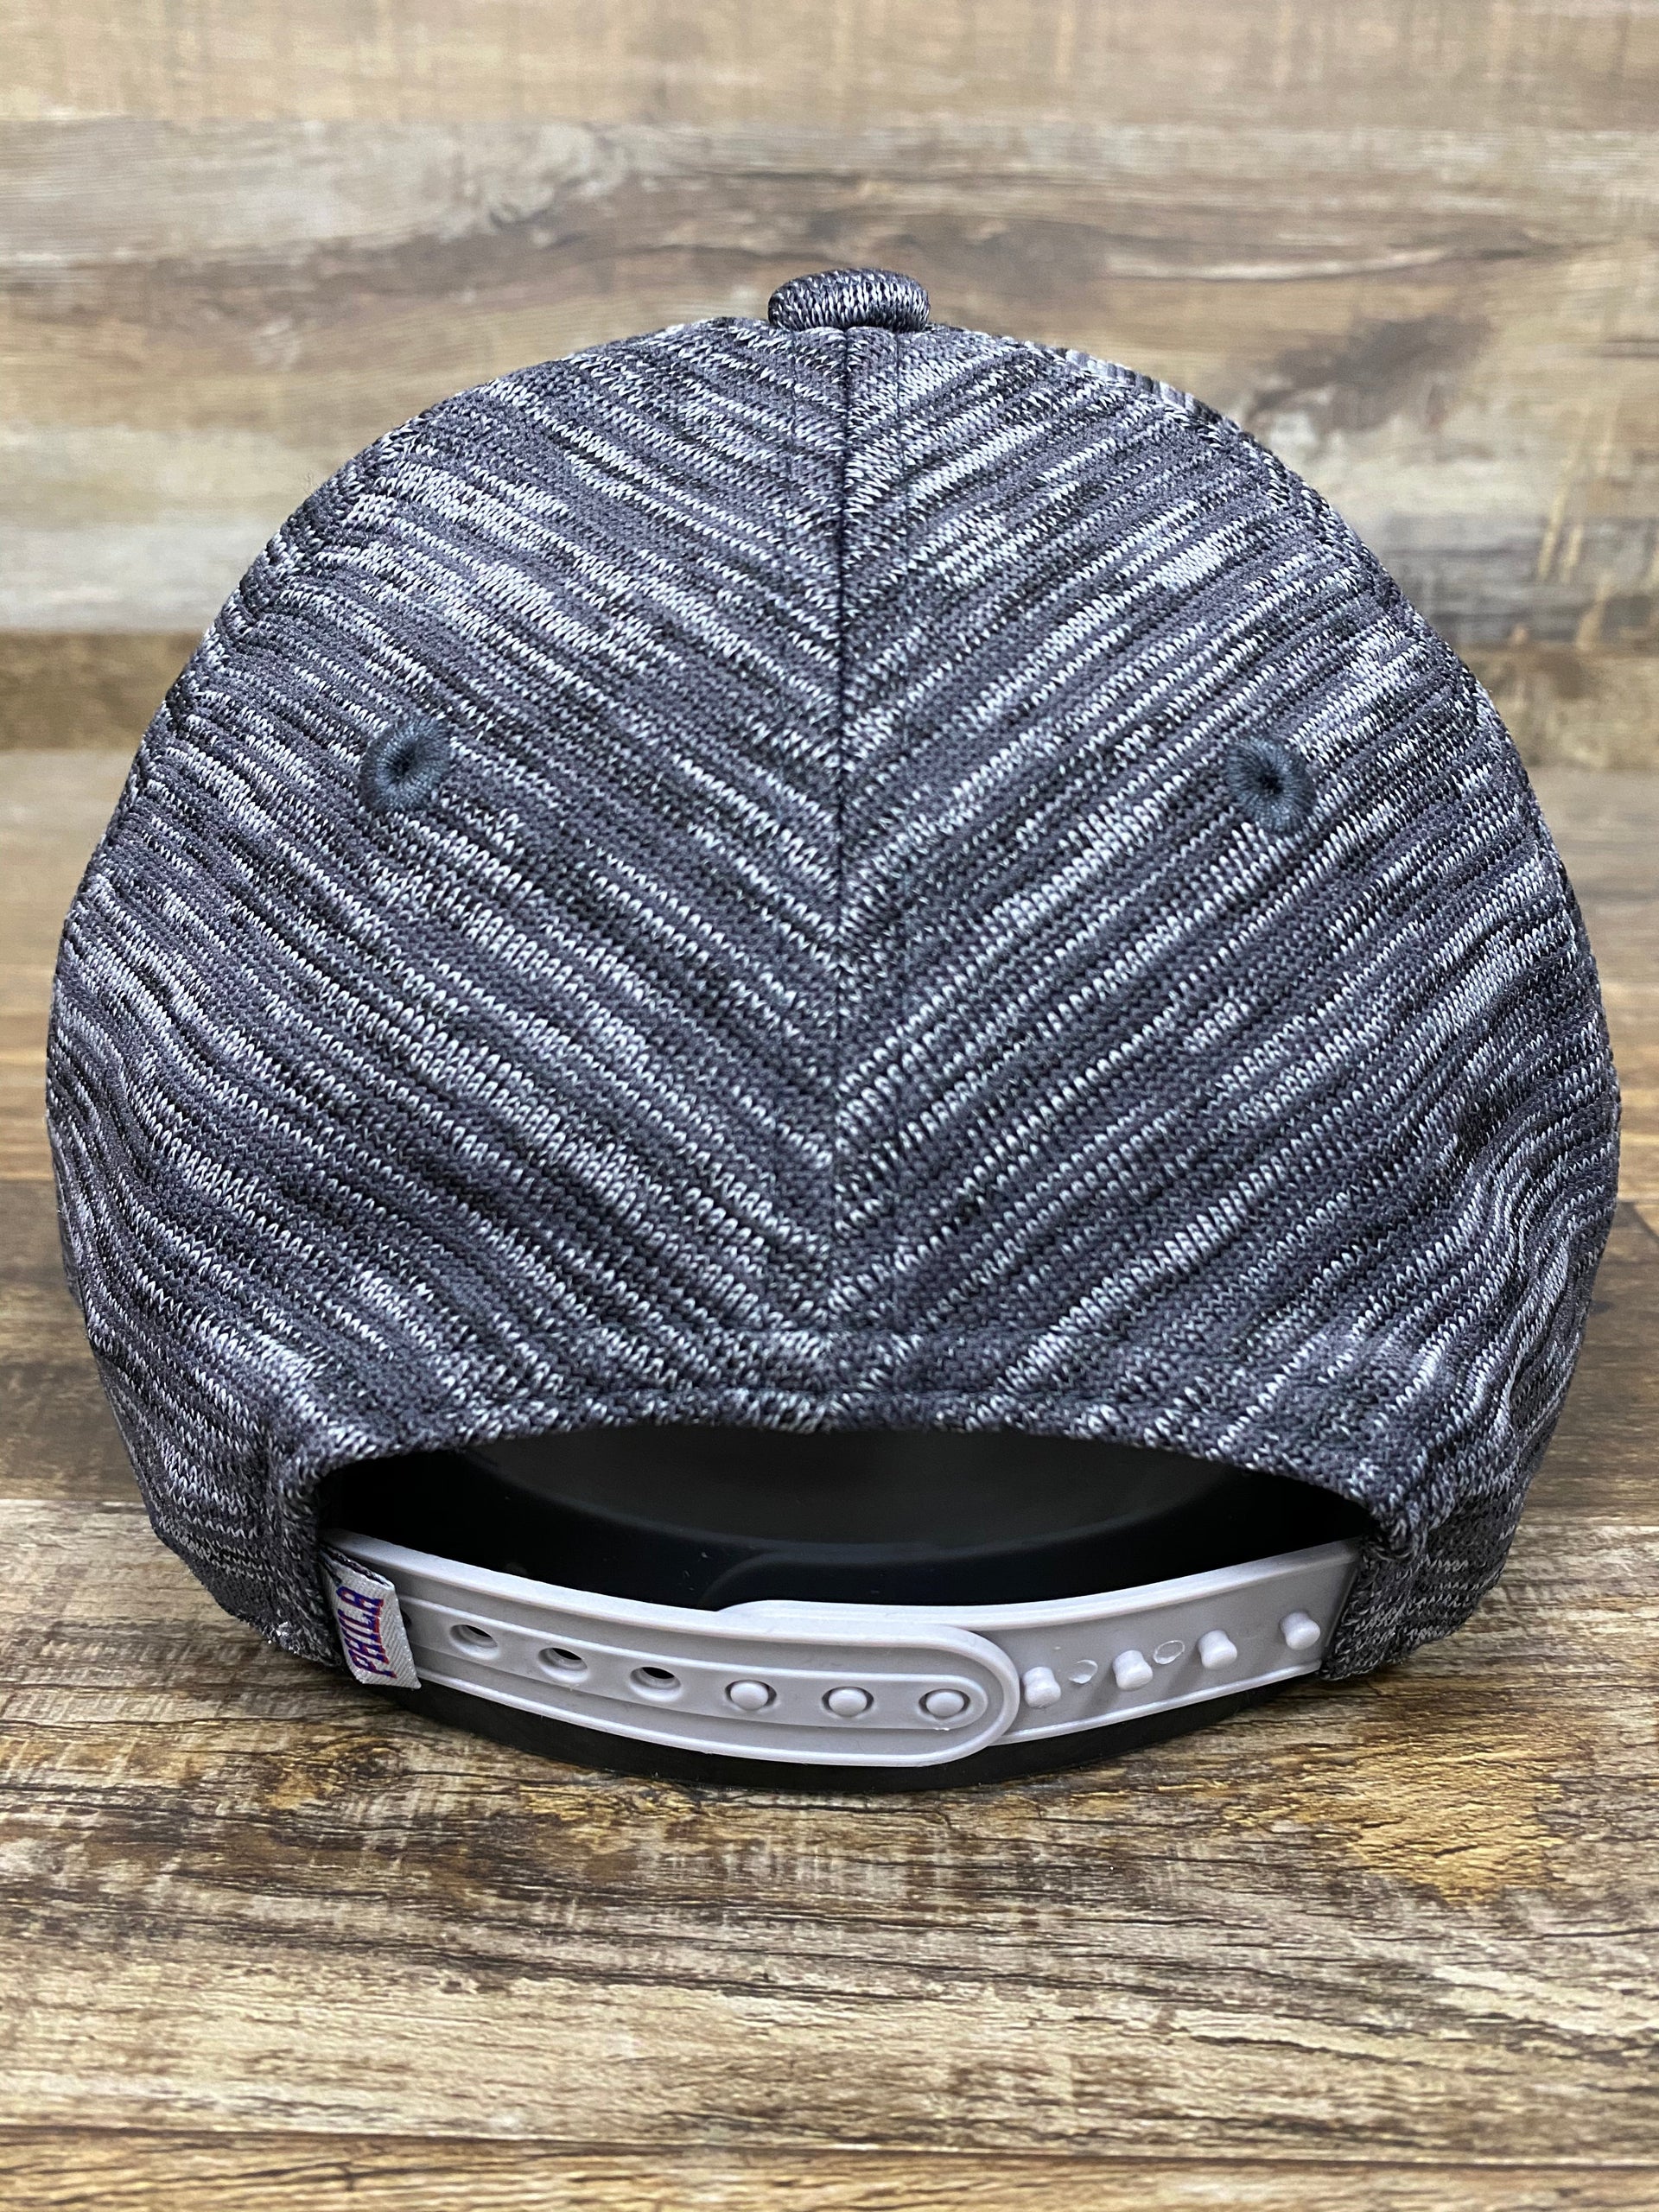 on the back of the Philadelphia Phillies Retro Logo Space-Dye Gray Trucker Dad Hat is space-dye cross-dyed gray stripes and an adjustable snap back